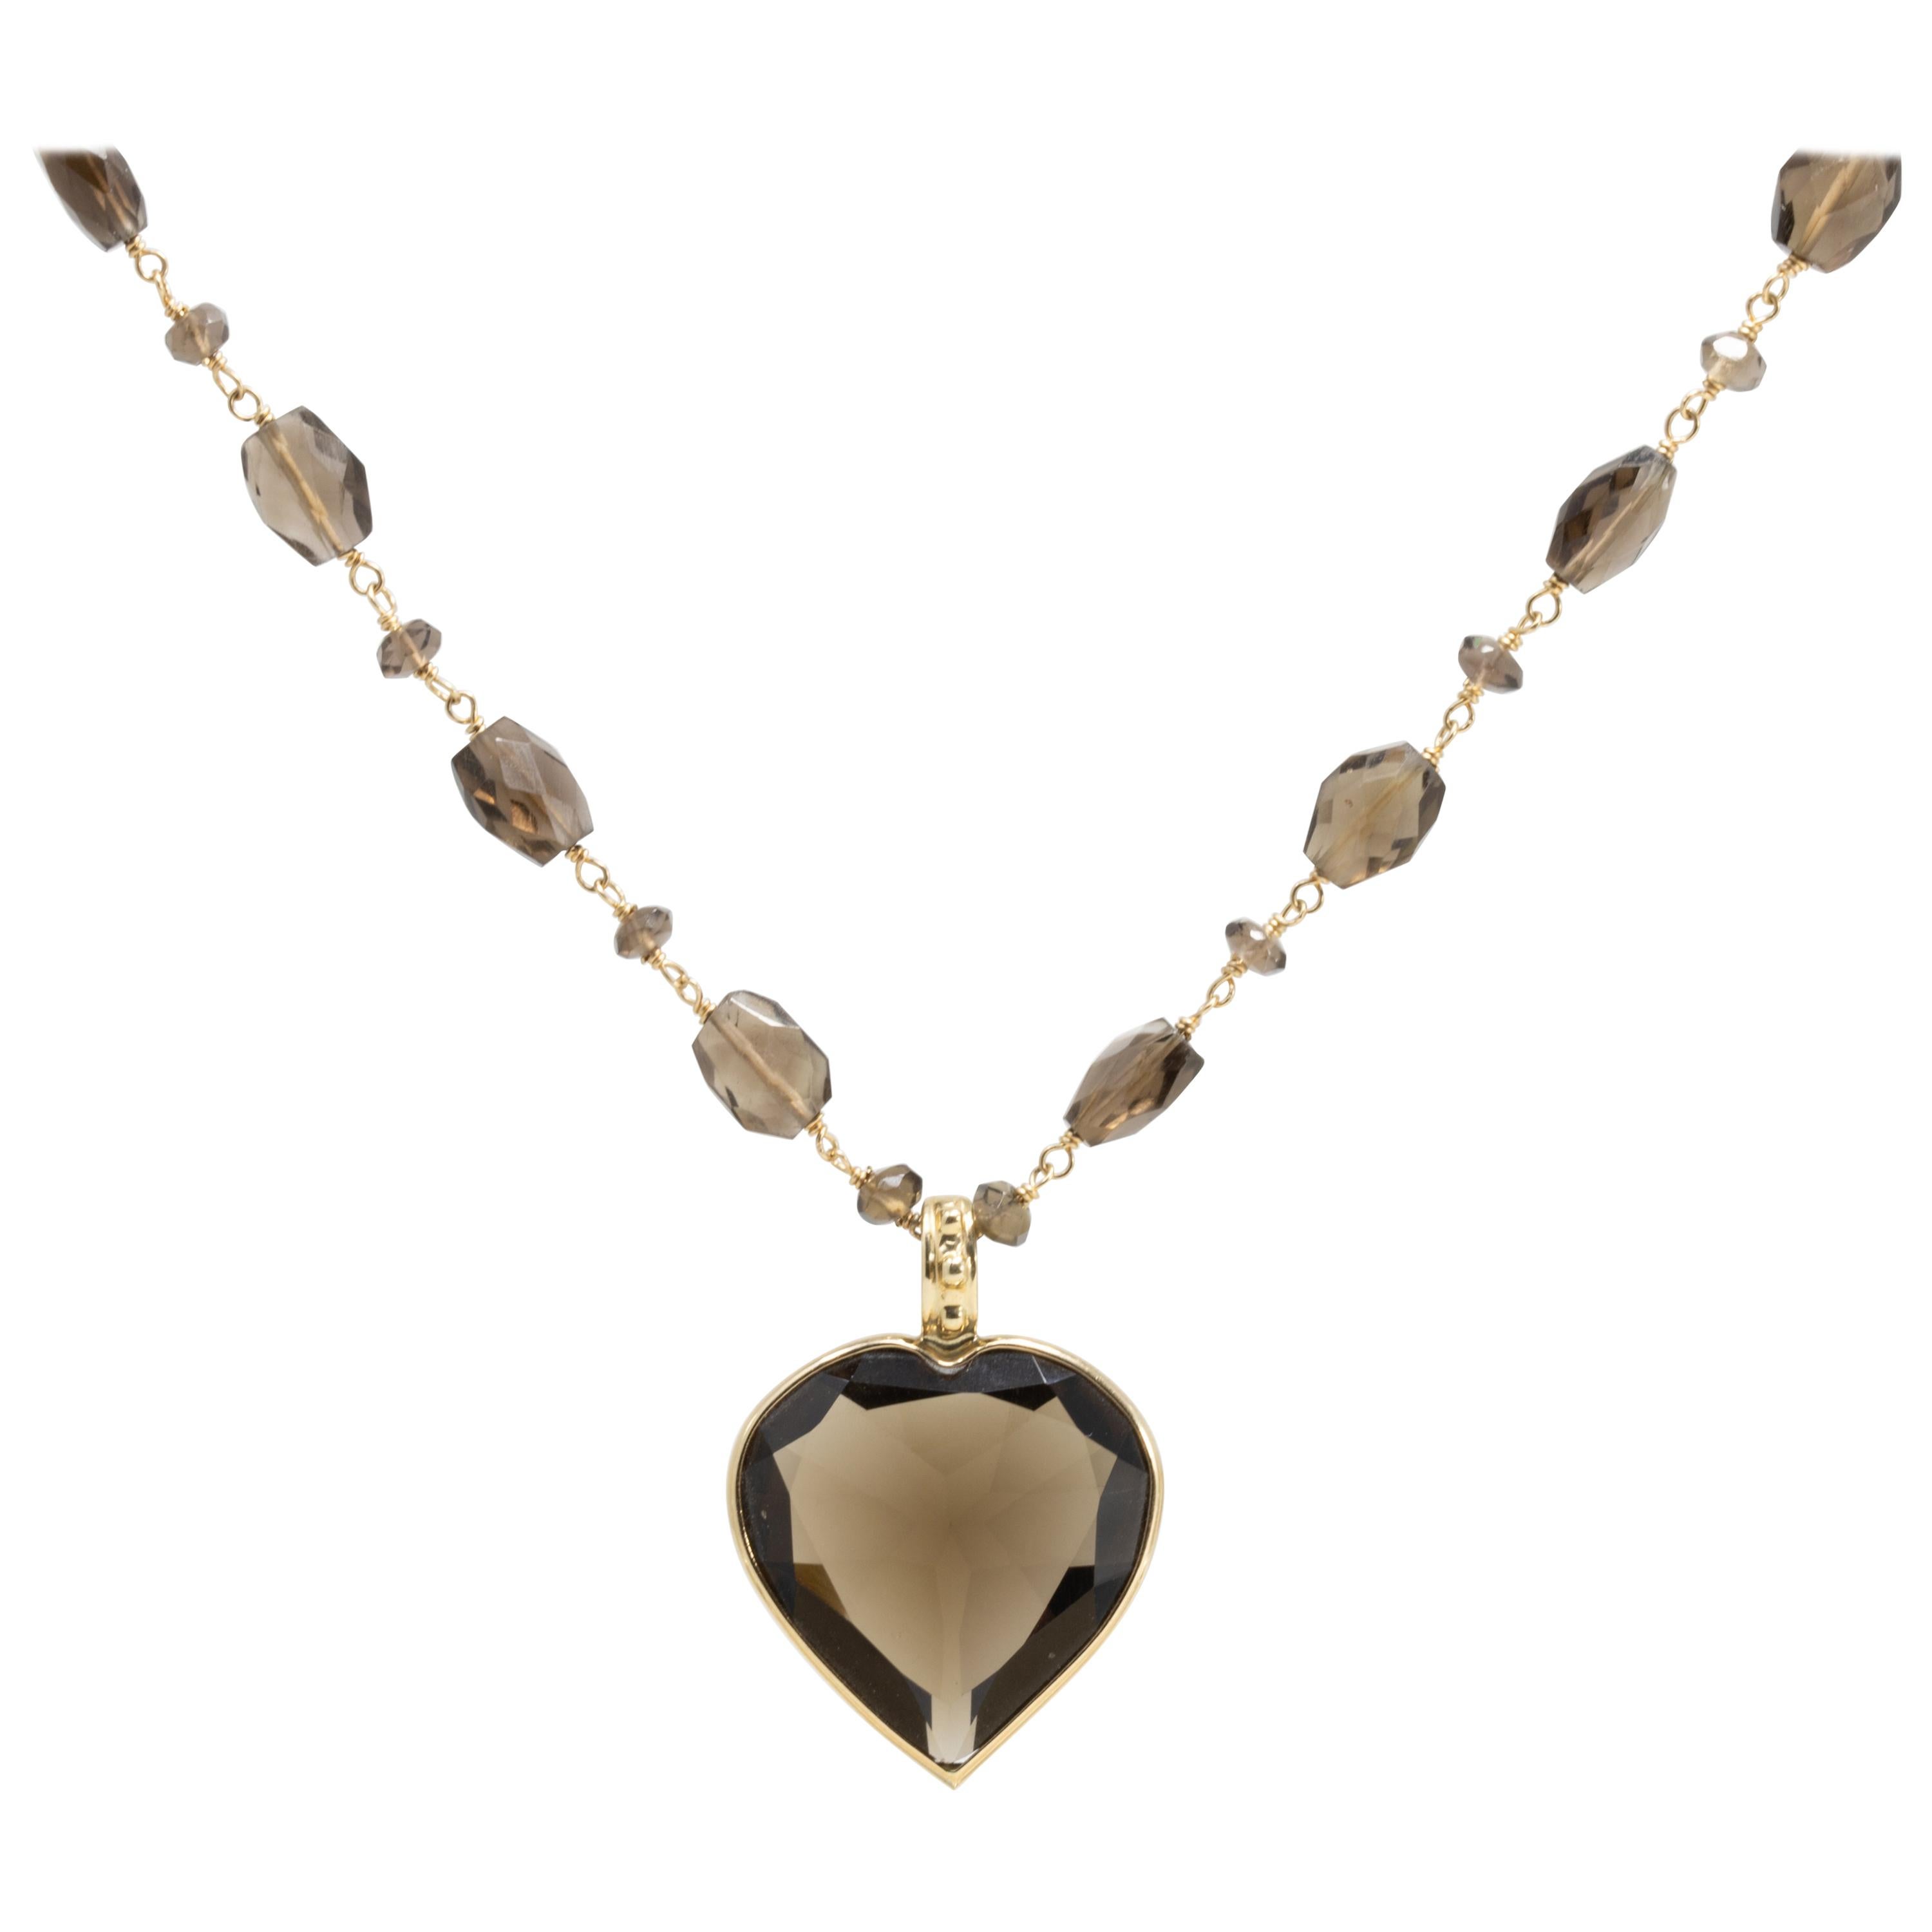 Faceted Quartz Heart Pendant and Beaded Necklace in 14 Karat Yellow Gold